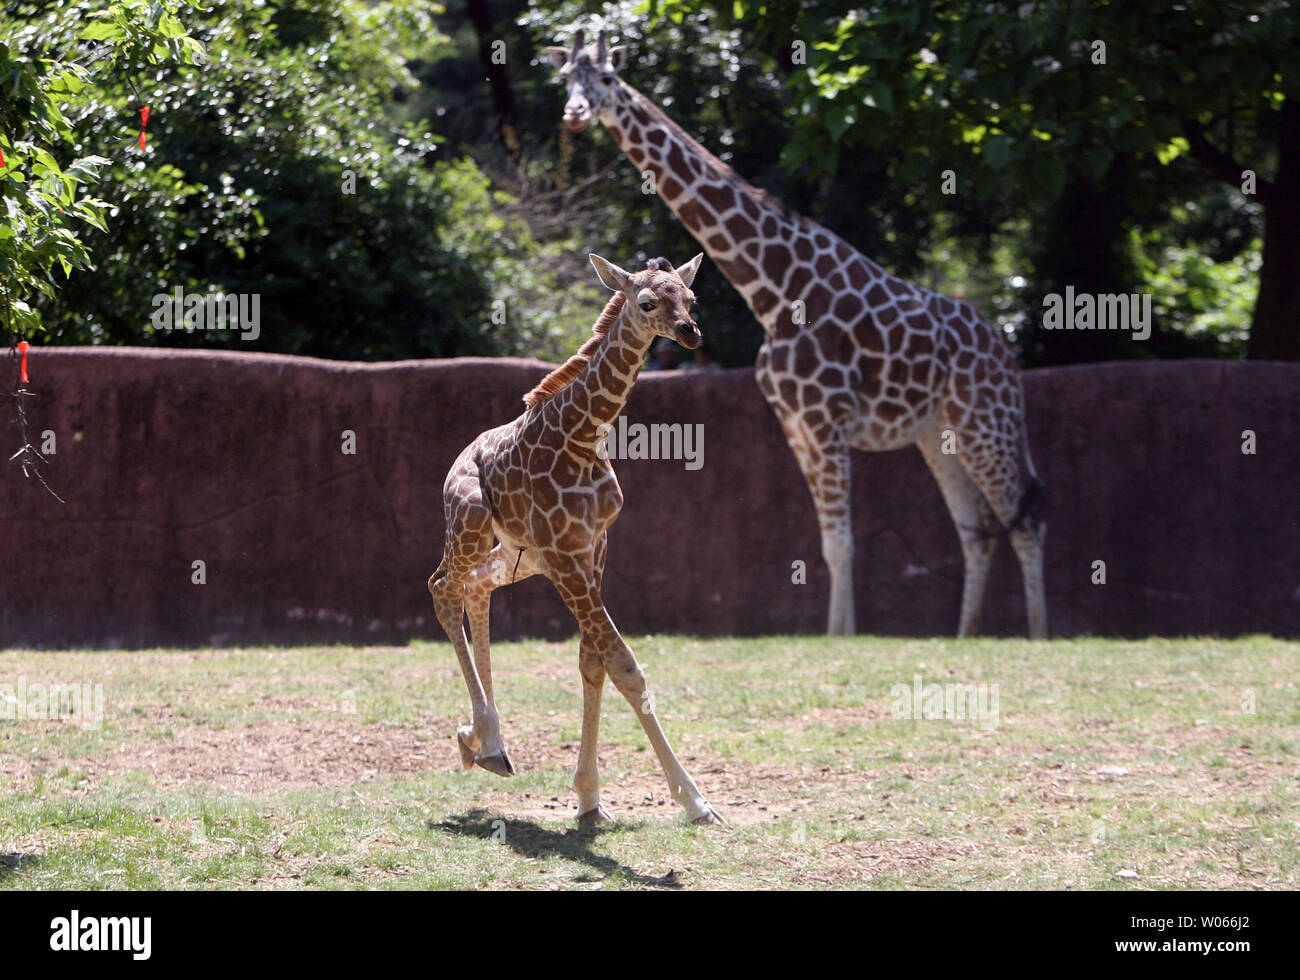 A new baby male giraffe runs in the yard for the first time, past father Dexter at the St. Louis Zoo on May 23, 2006. The Zoo's newest addition, just five days old, weighs 138 pounds and stands over 5 1/2 feet. He will grow to between 16 and 18 feet tall.    (UPI Photo/Bill Greenblatt) Stock Photo